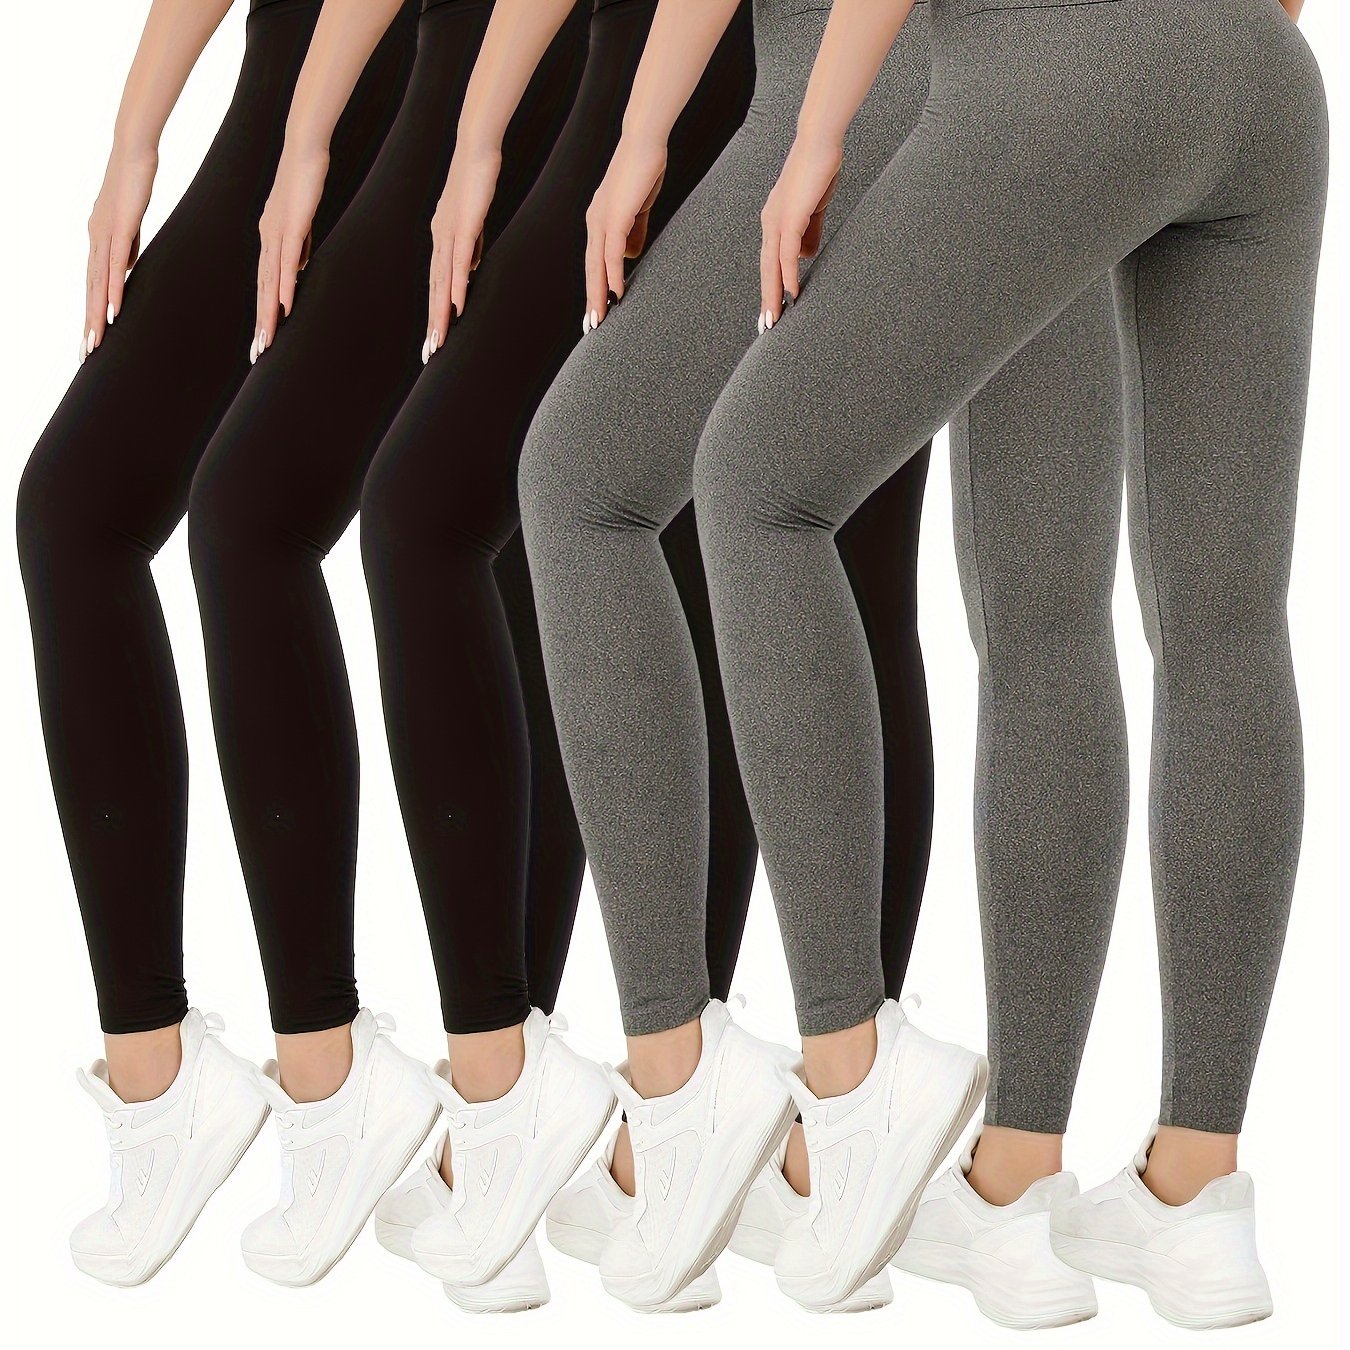 HSR Seamless Soft Cotton Leggings for Women - High Waisted Tummy Control No  See Through Workout Yoga Pants